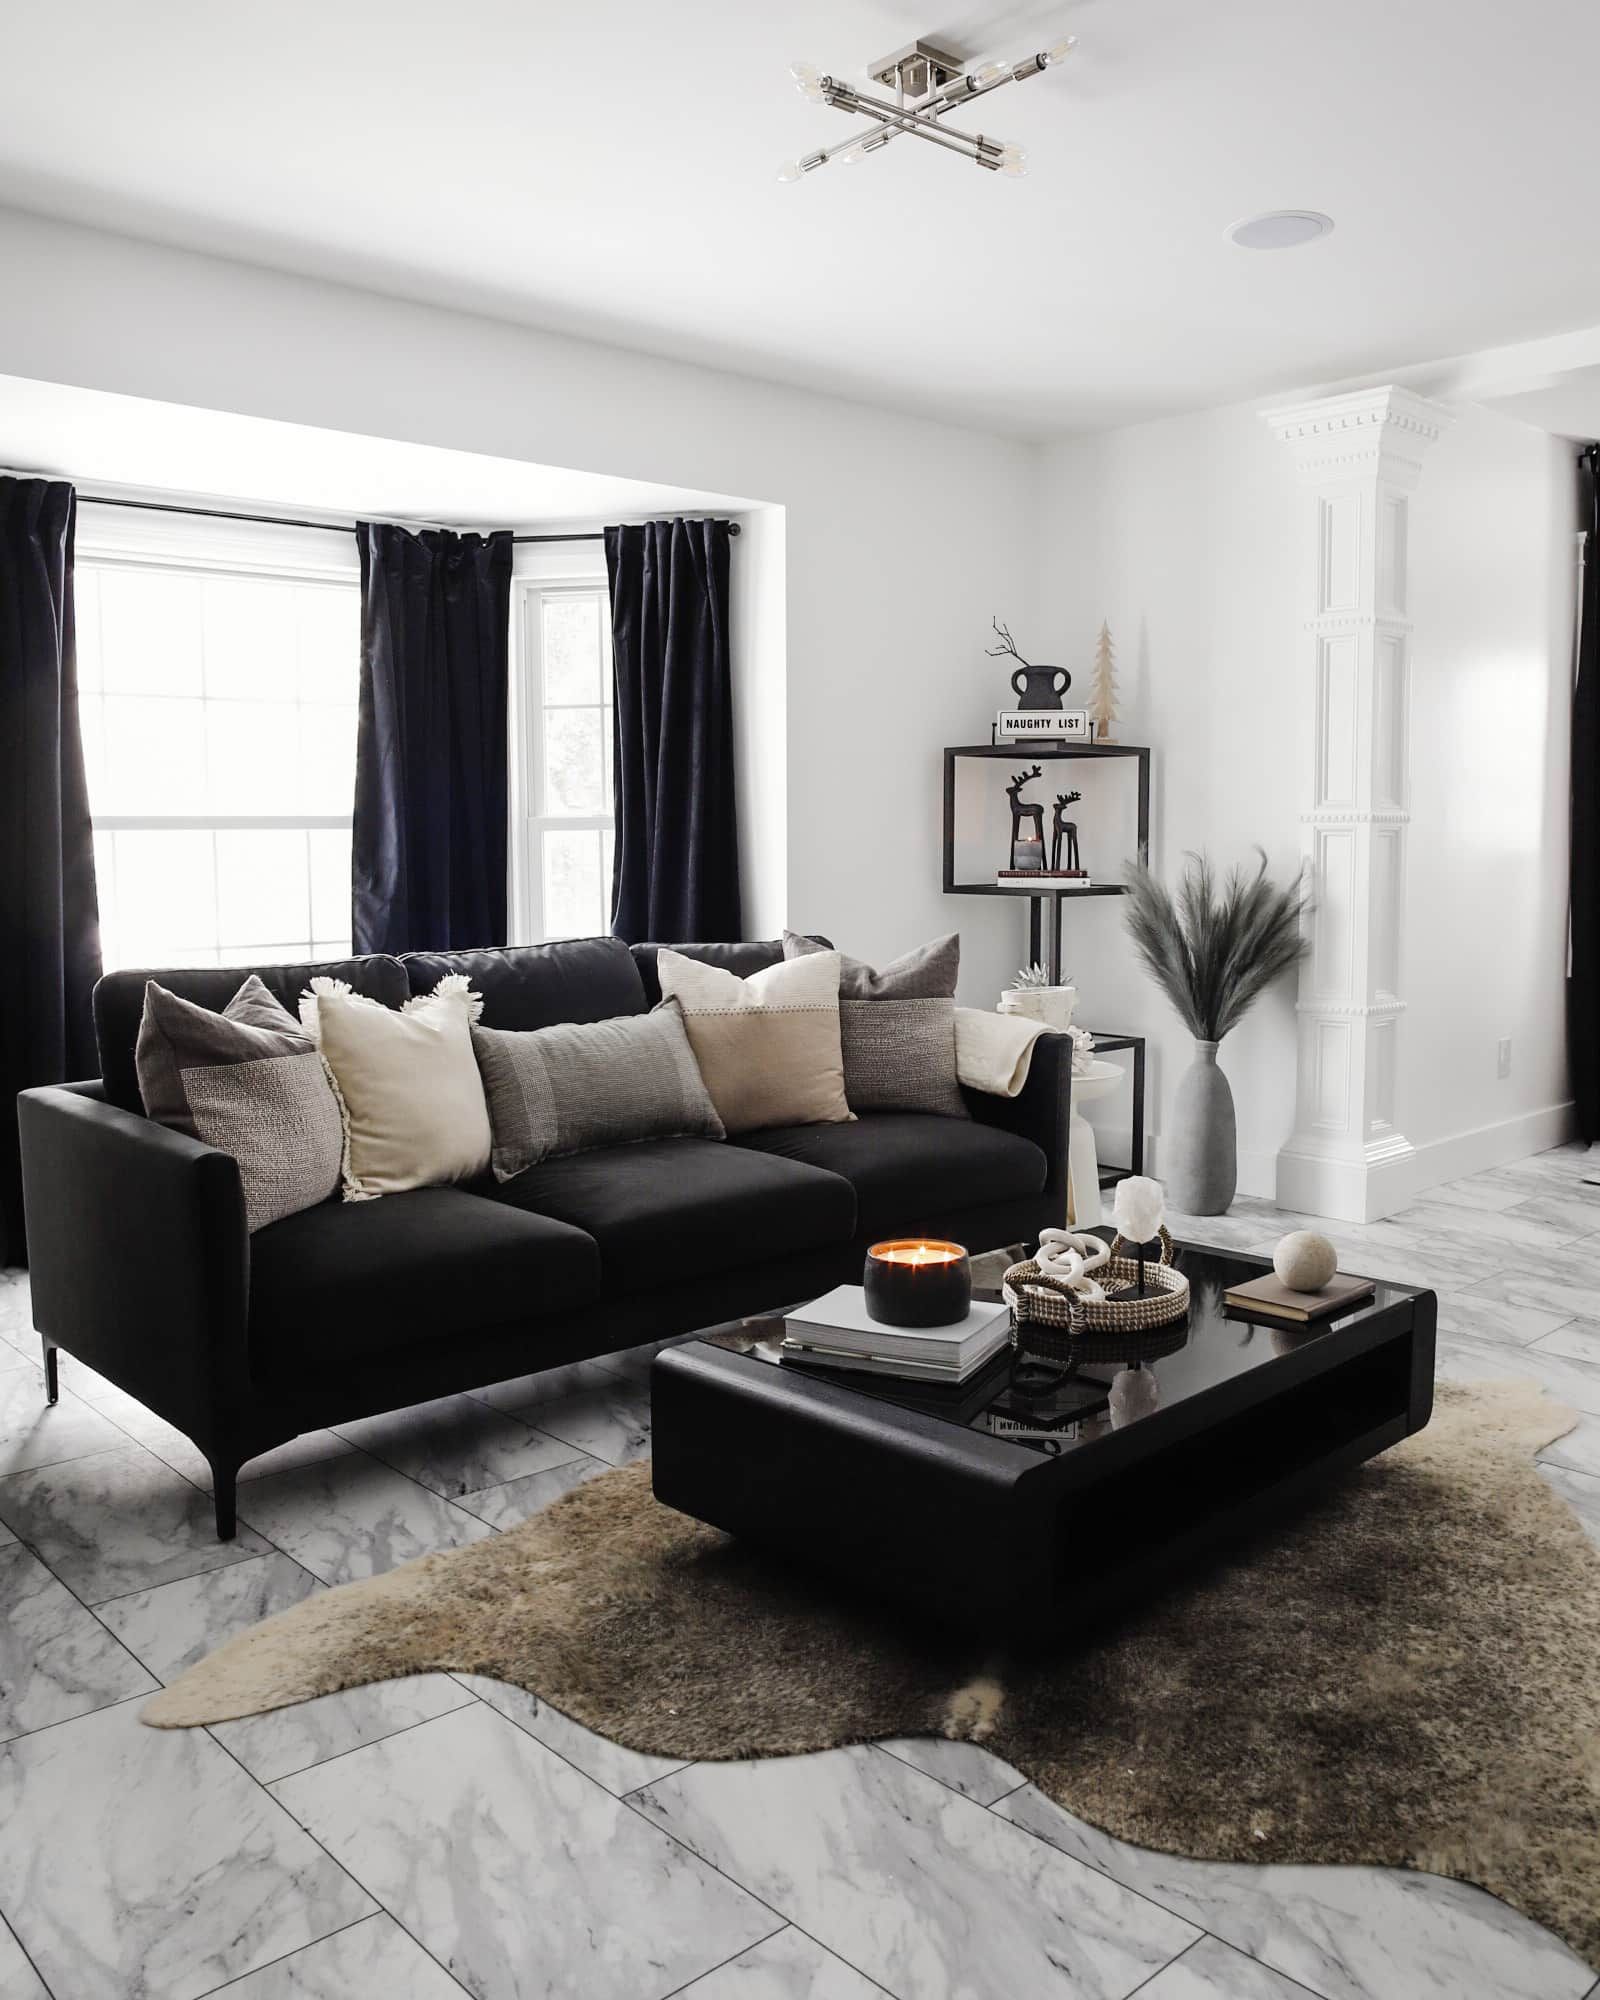 How To Style A Black Sofa | Castlery Us Regarding Sofas In Black (View 3 of 15)